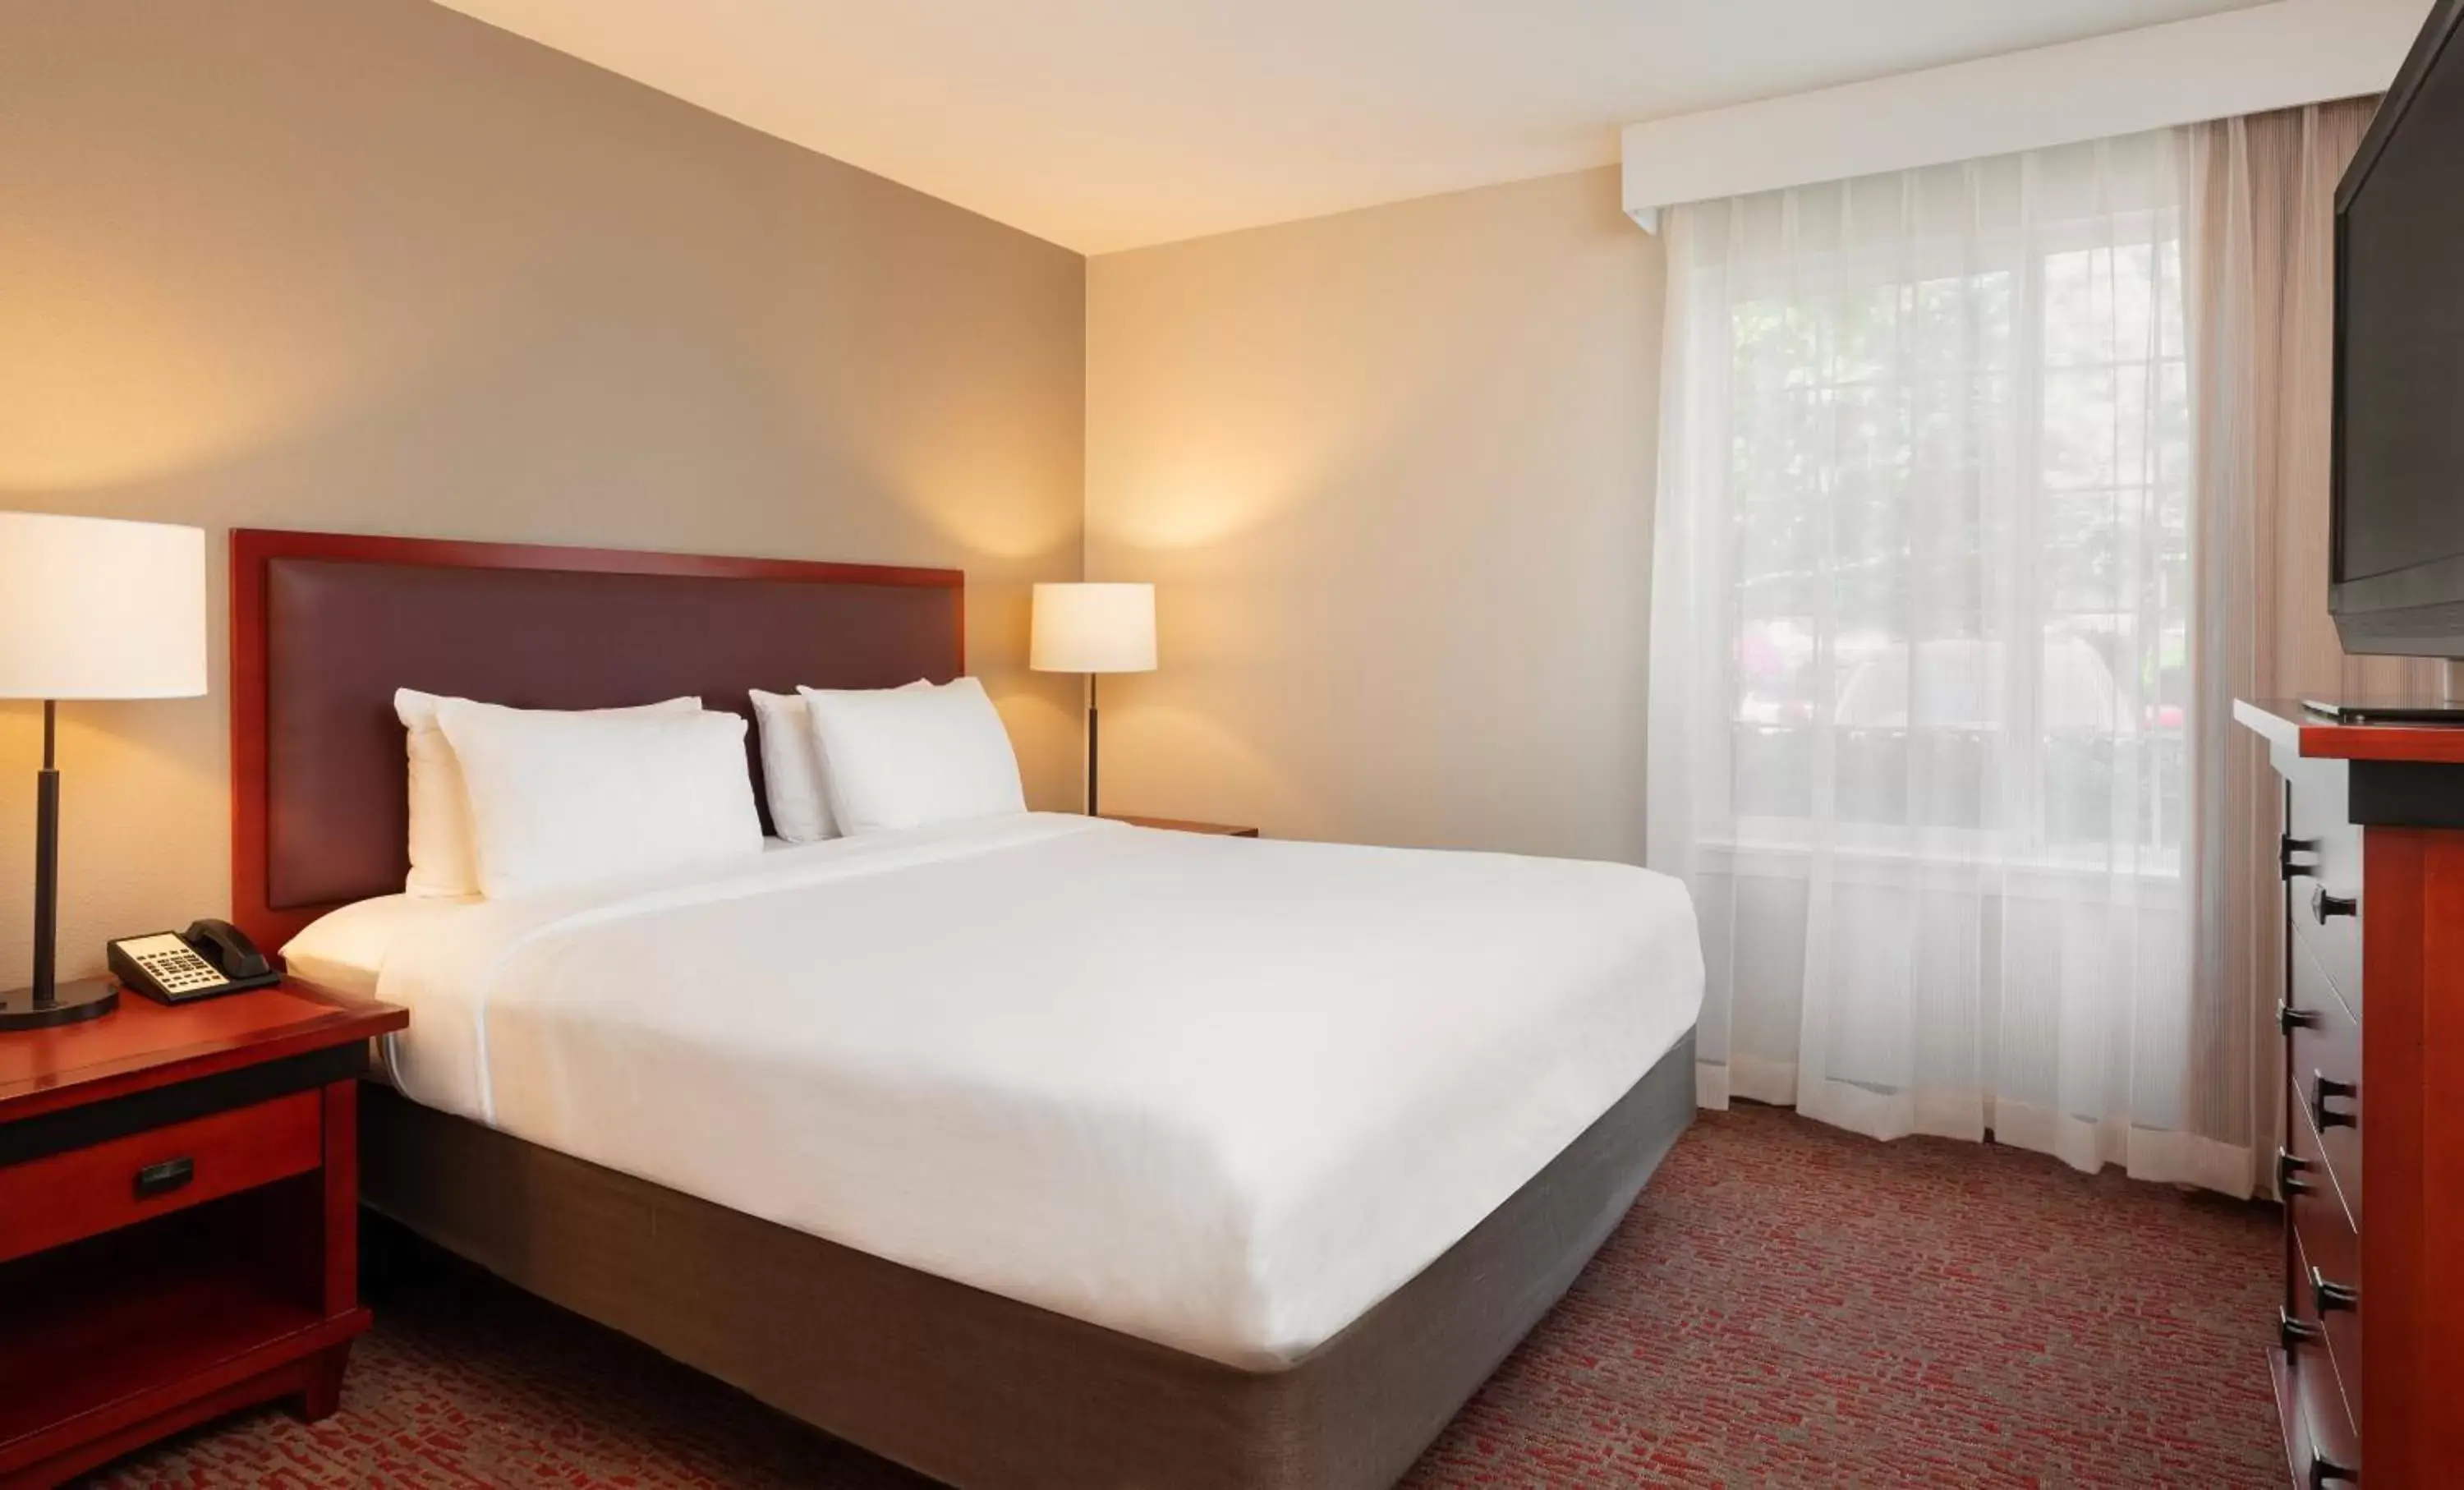 Executive Suite in Larkspur Landing Sunnyvale-An All-Suite Hotel